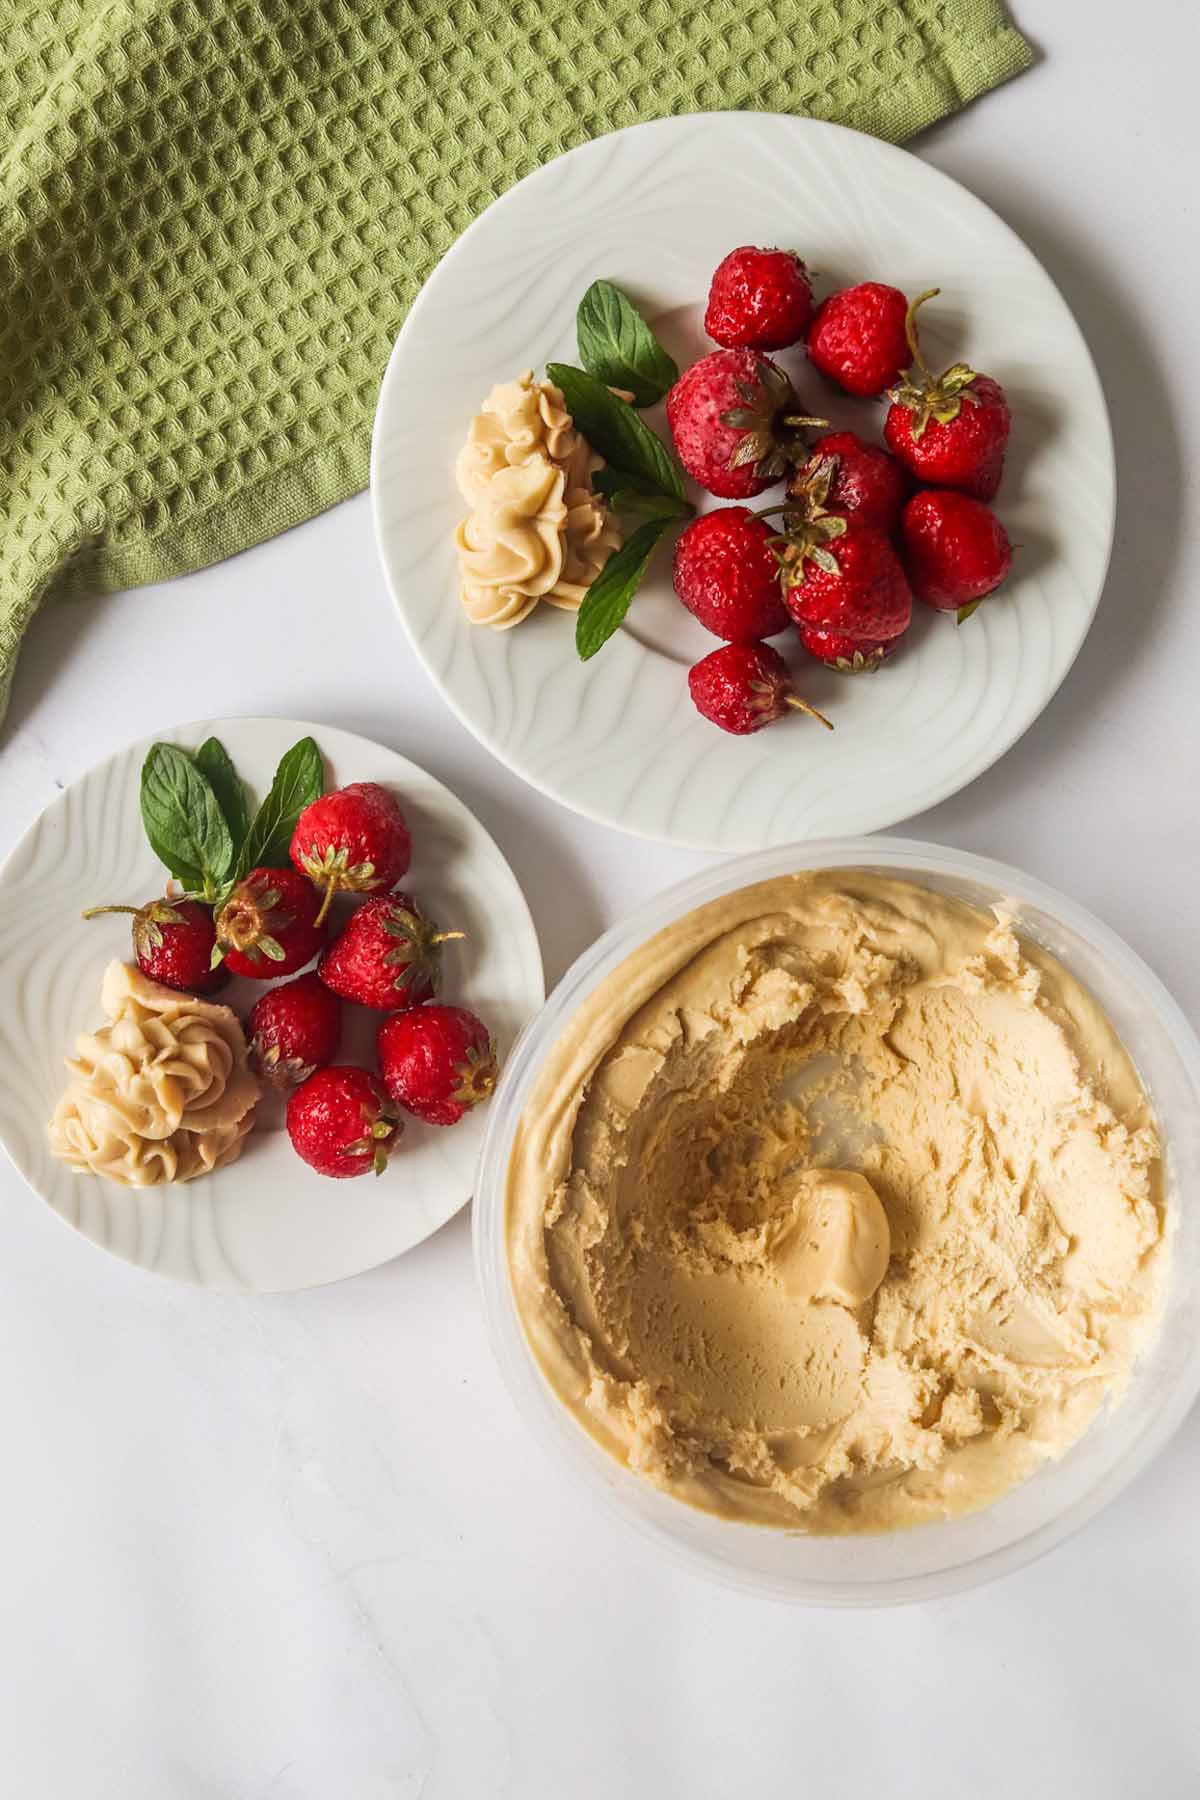 top view of two plates of strawberries with peanut butter dip.